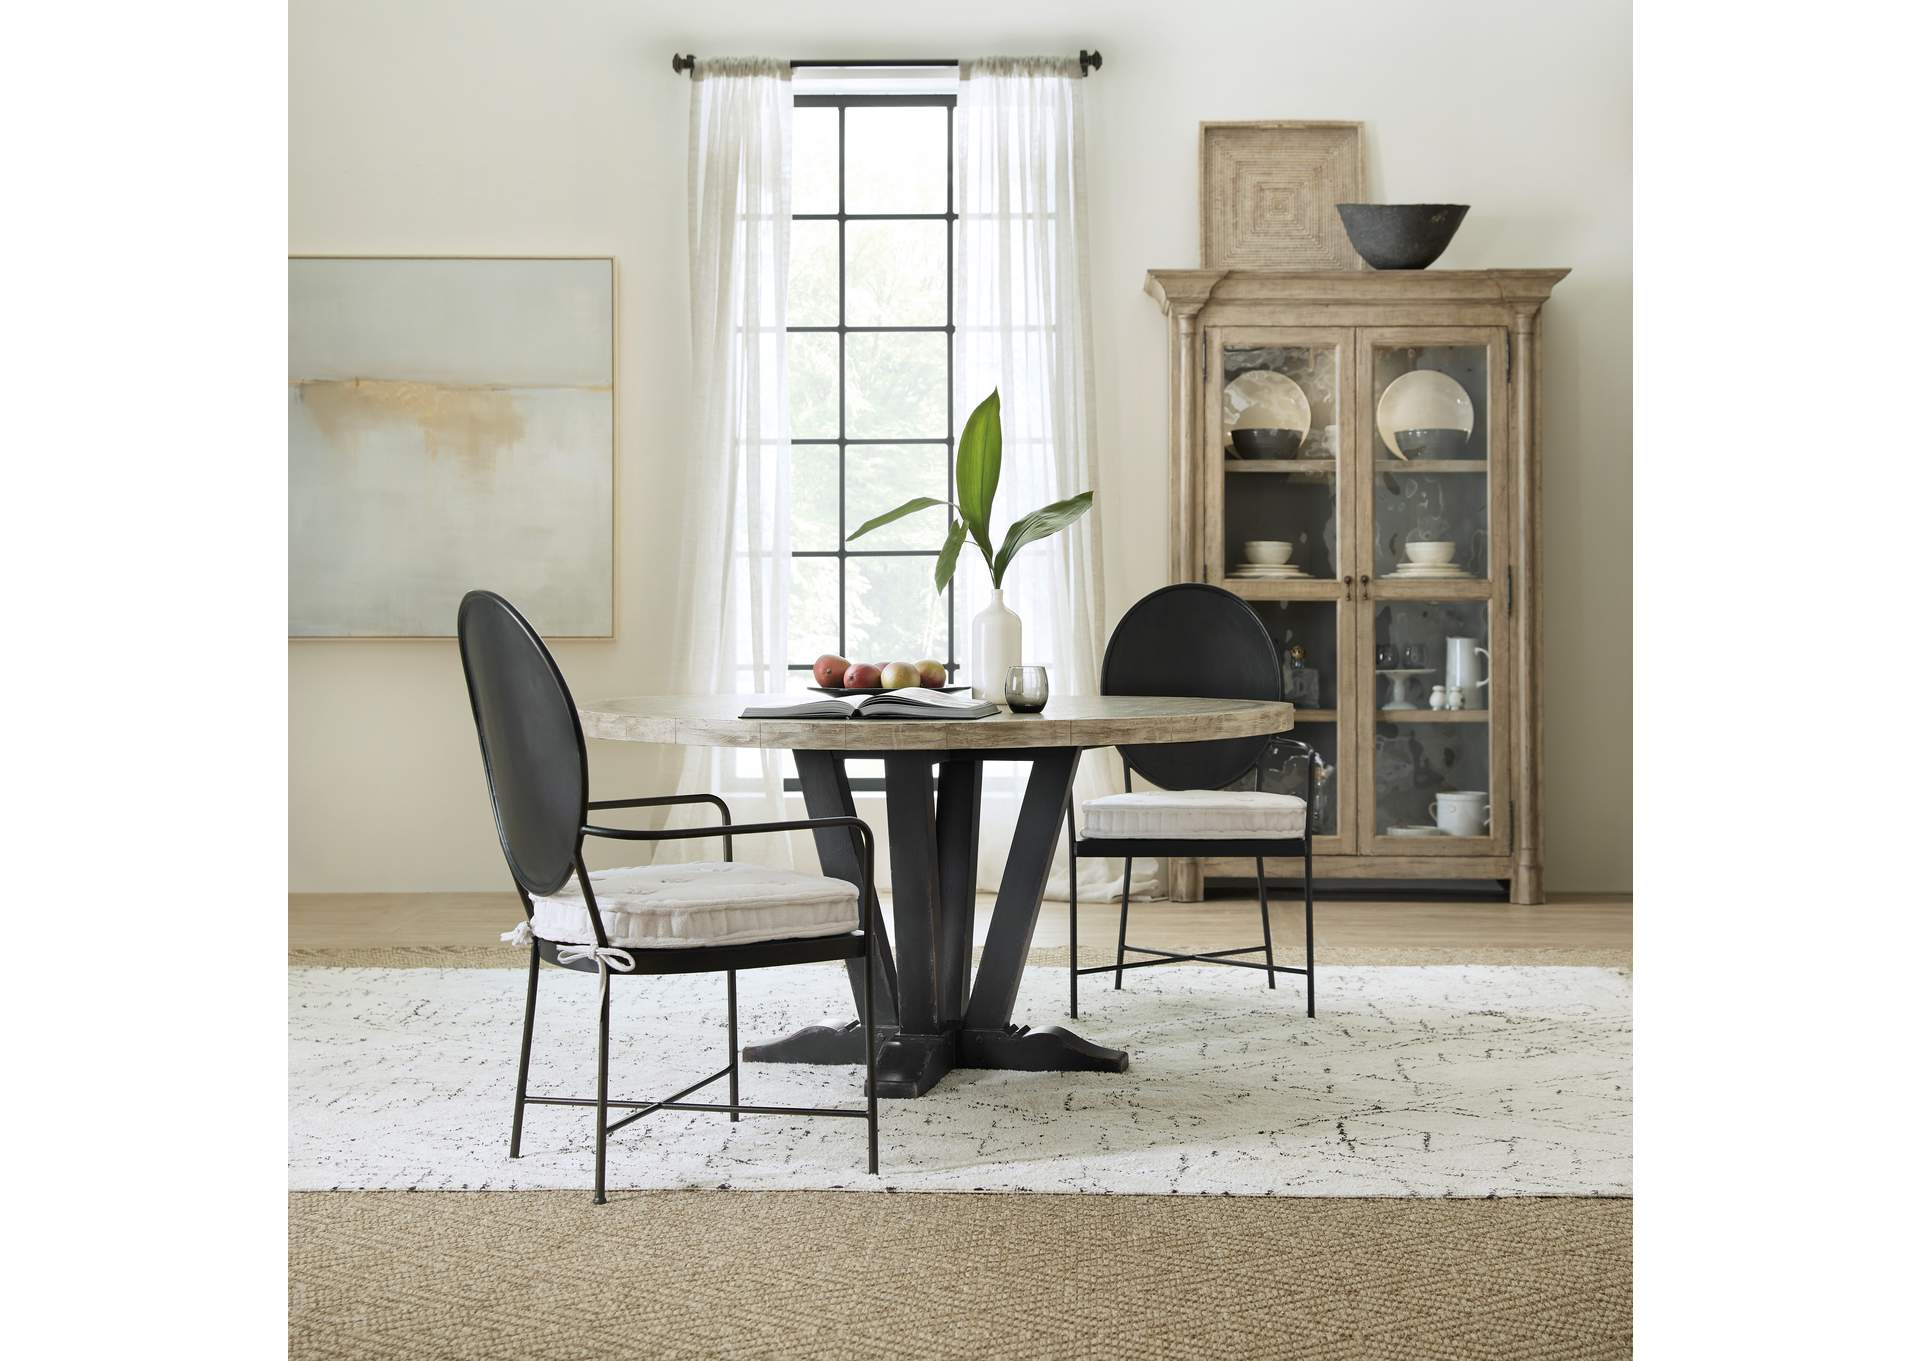 Ciao Bella 60in Round Dining Table,Hooker Furniture